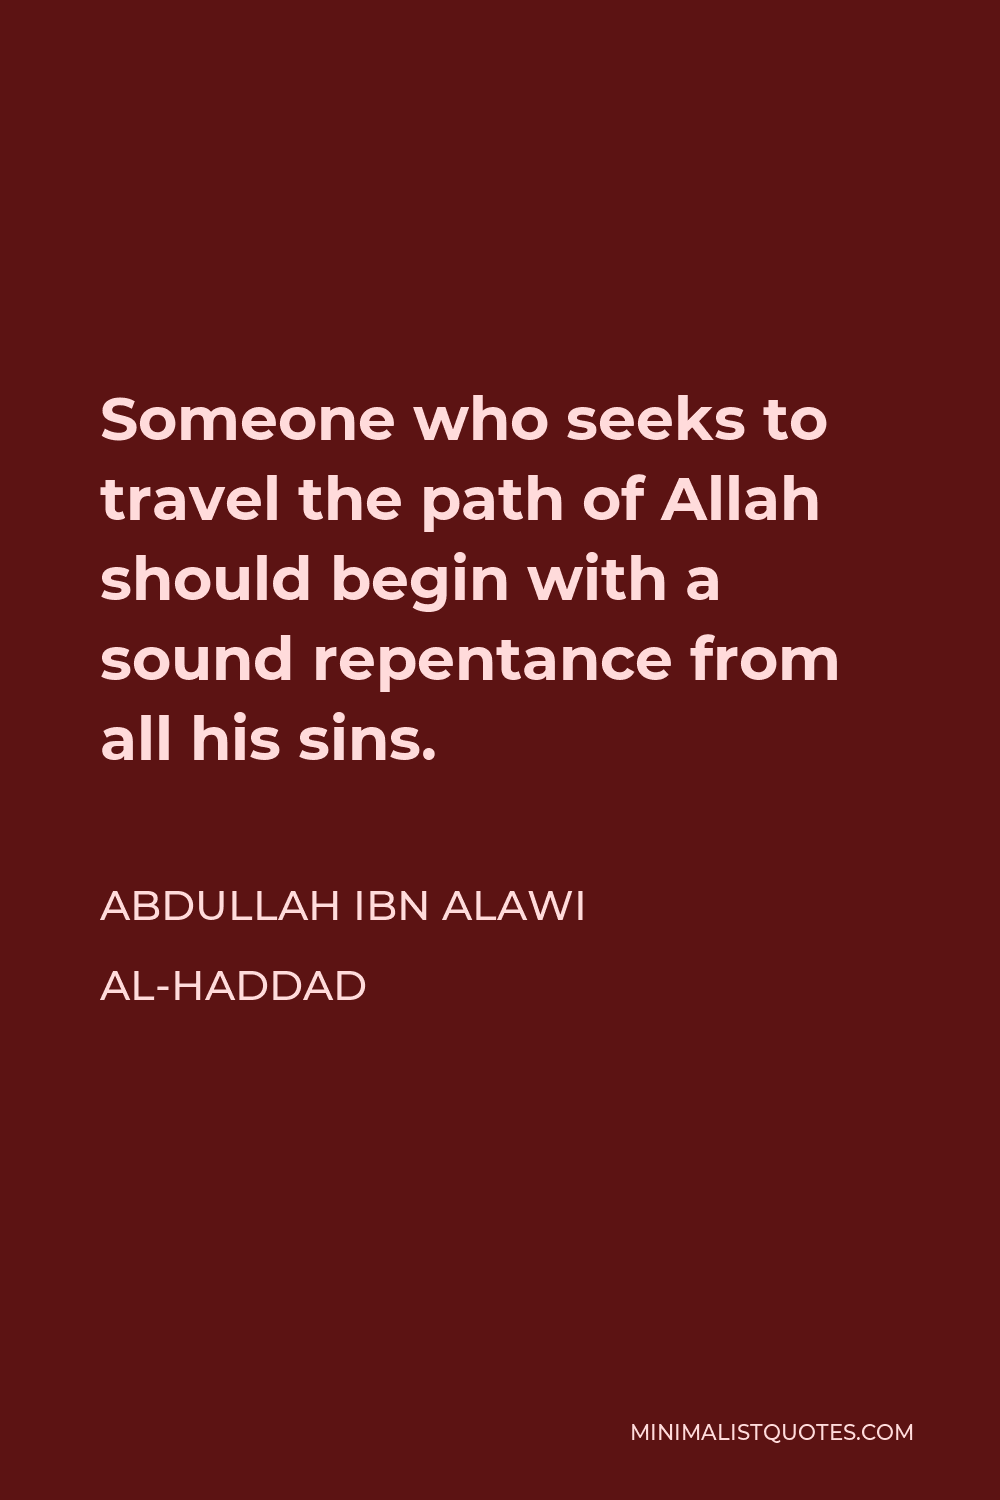 Abdullah ibn Alawi al-Haddad Quote - Someone who seeks to travel the path of Allah should begin with a sound repentance from all his sins.